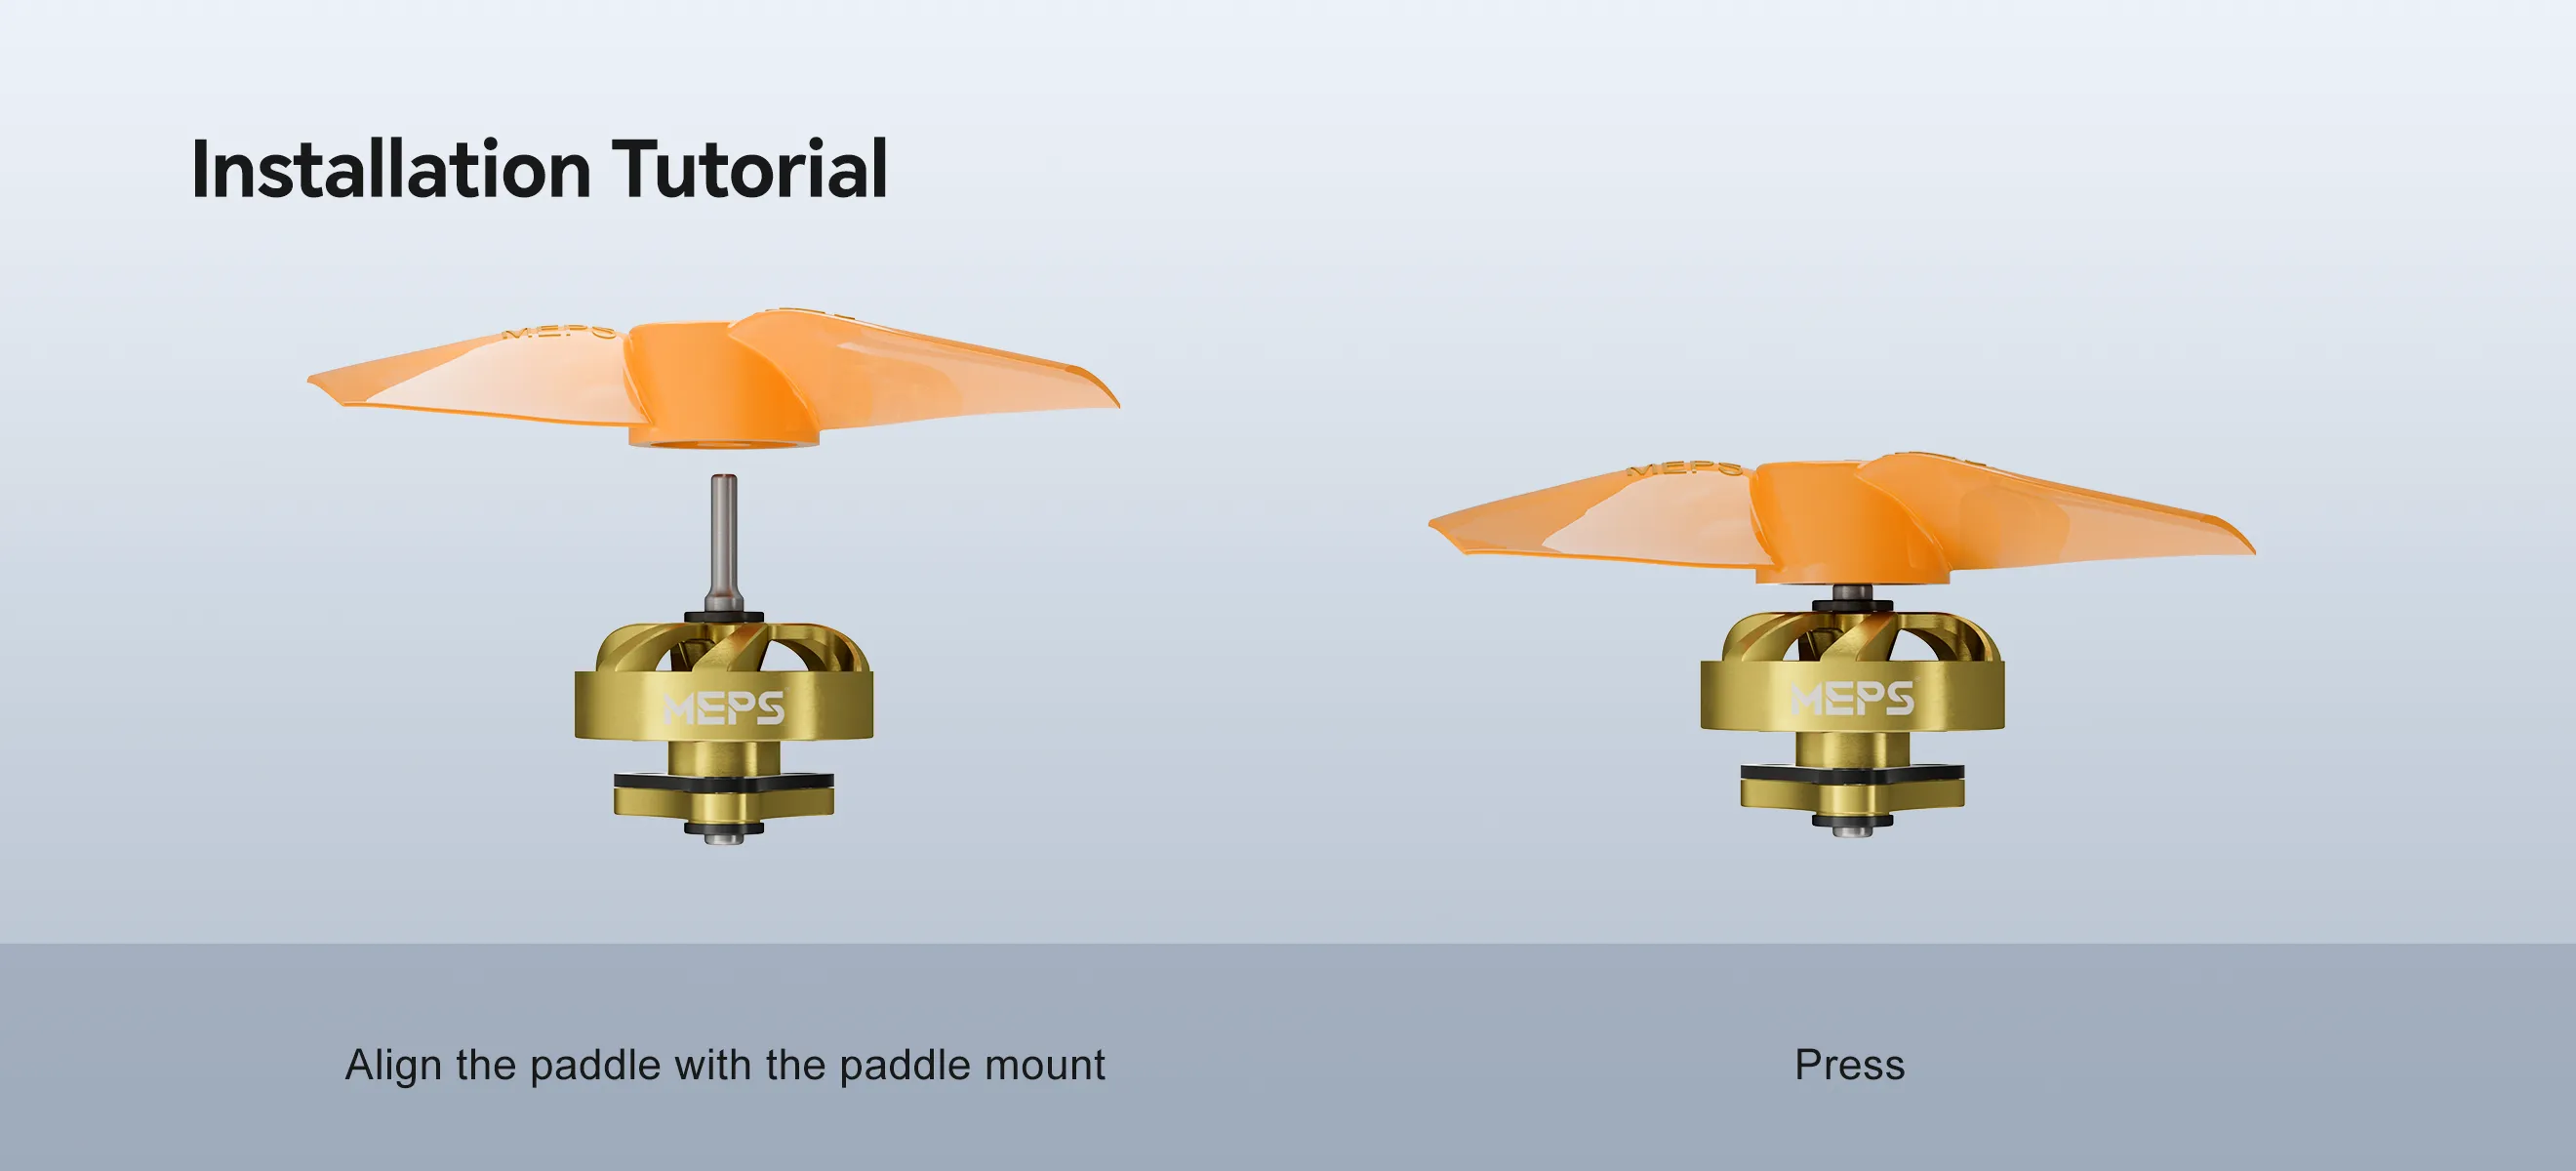 meps-drone-motor-and-propeller